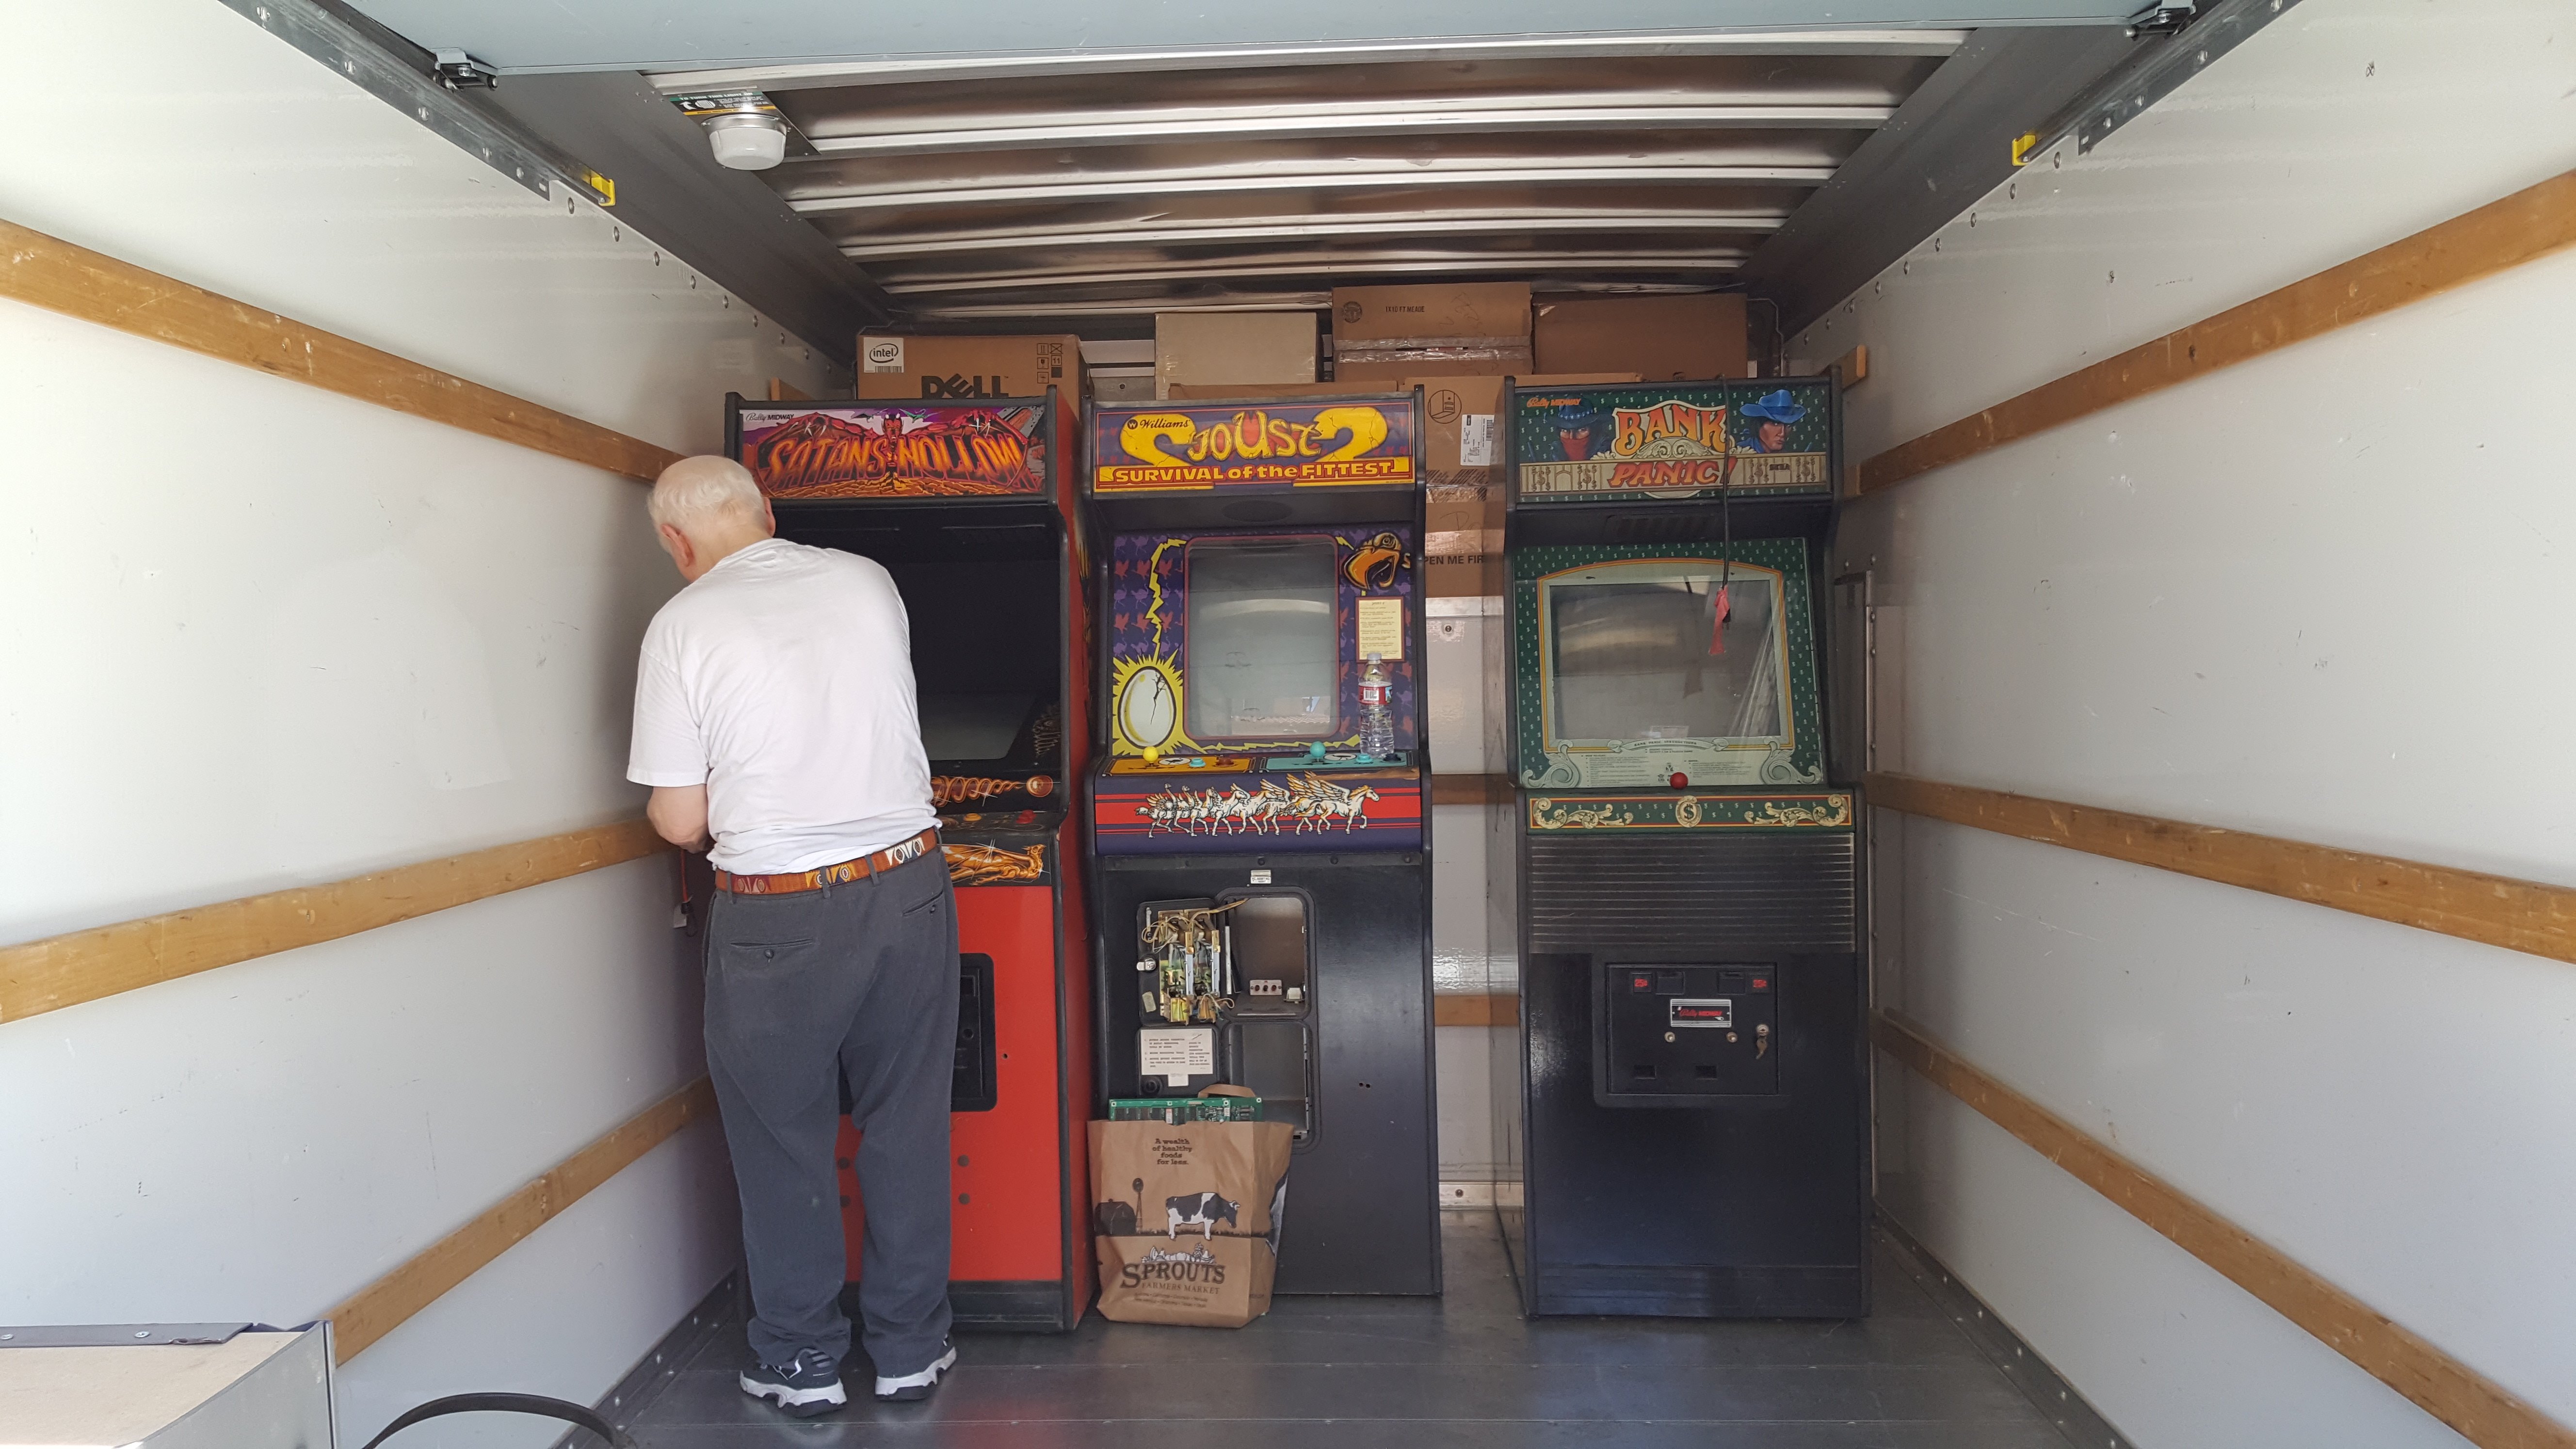 Some boxes, my dad, and the arcade machines